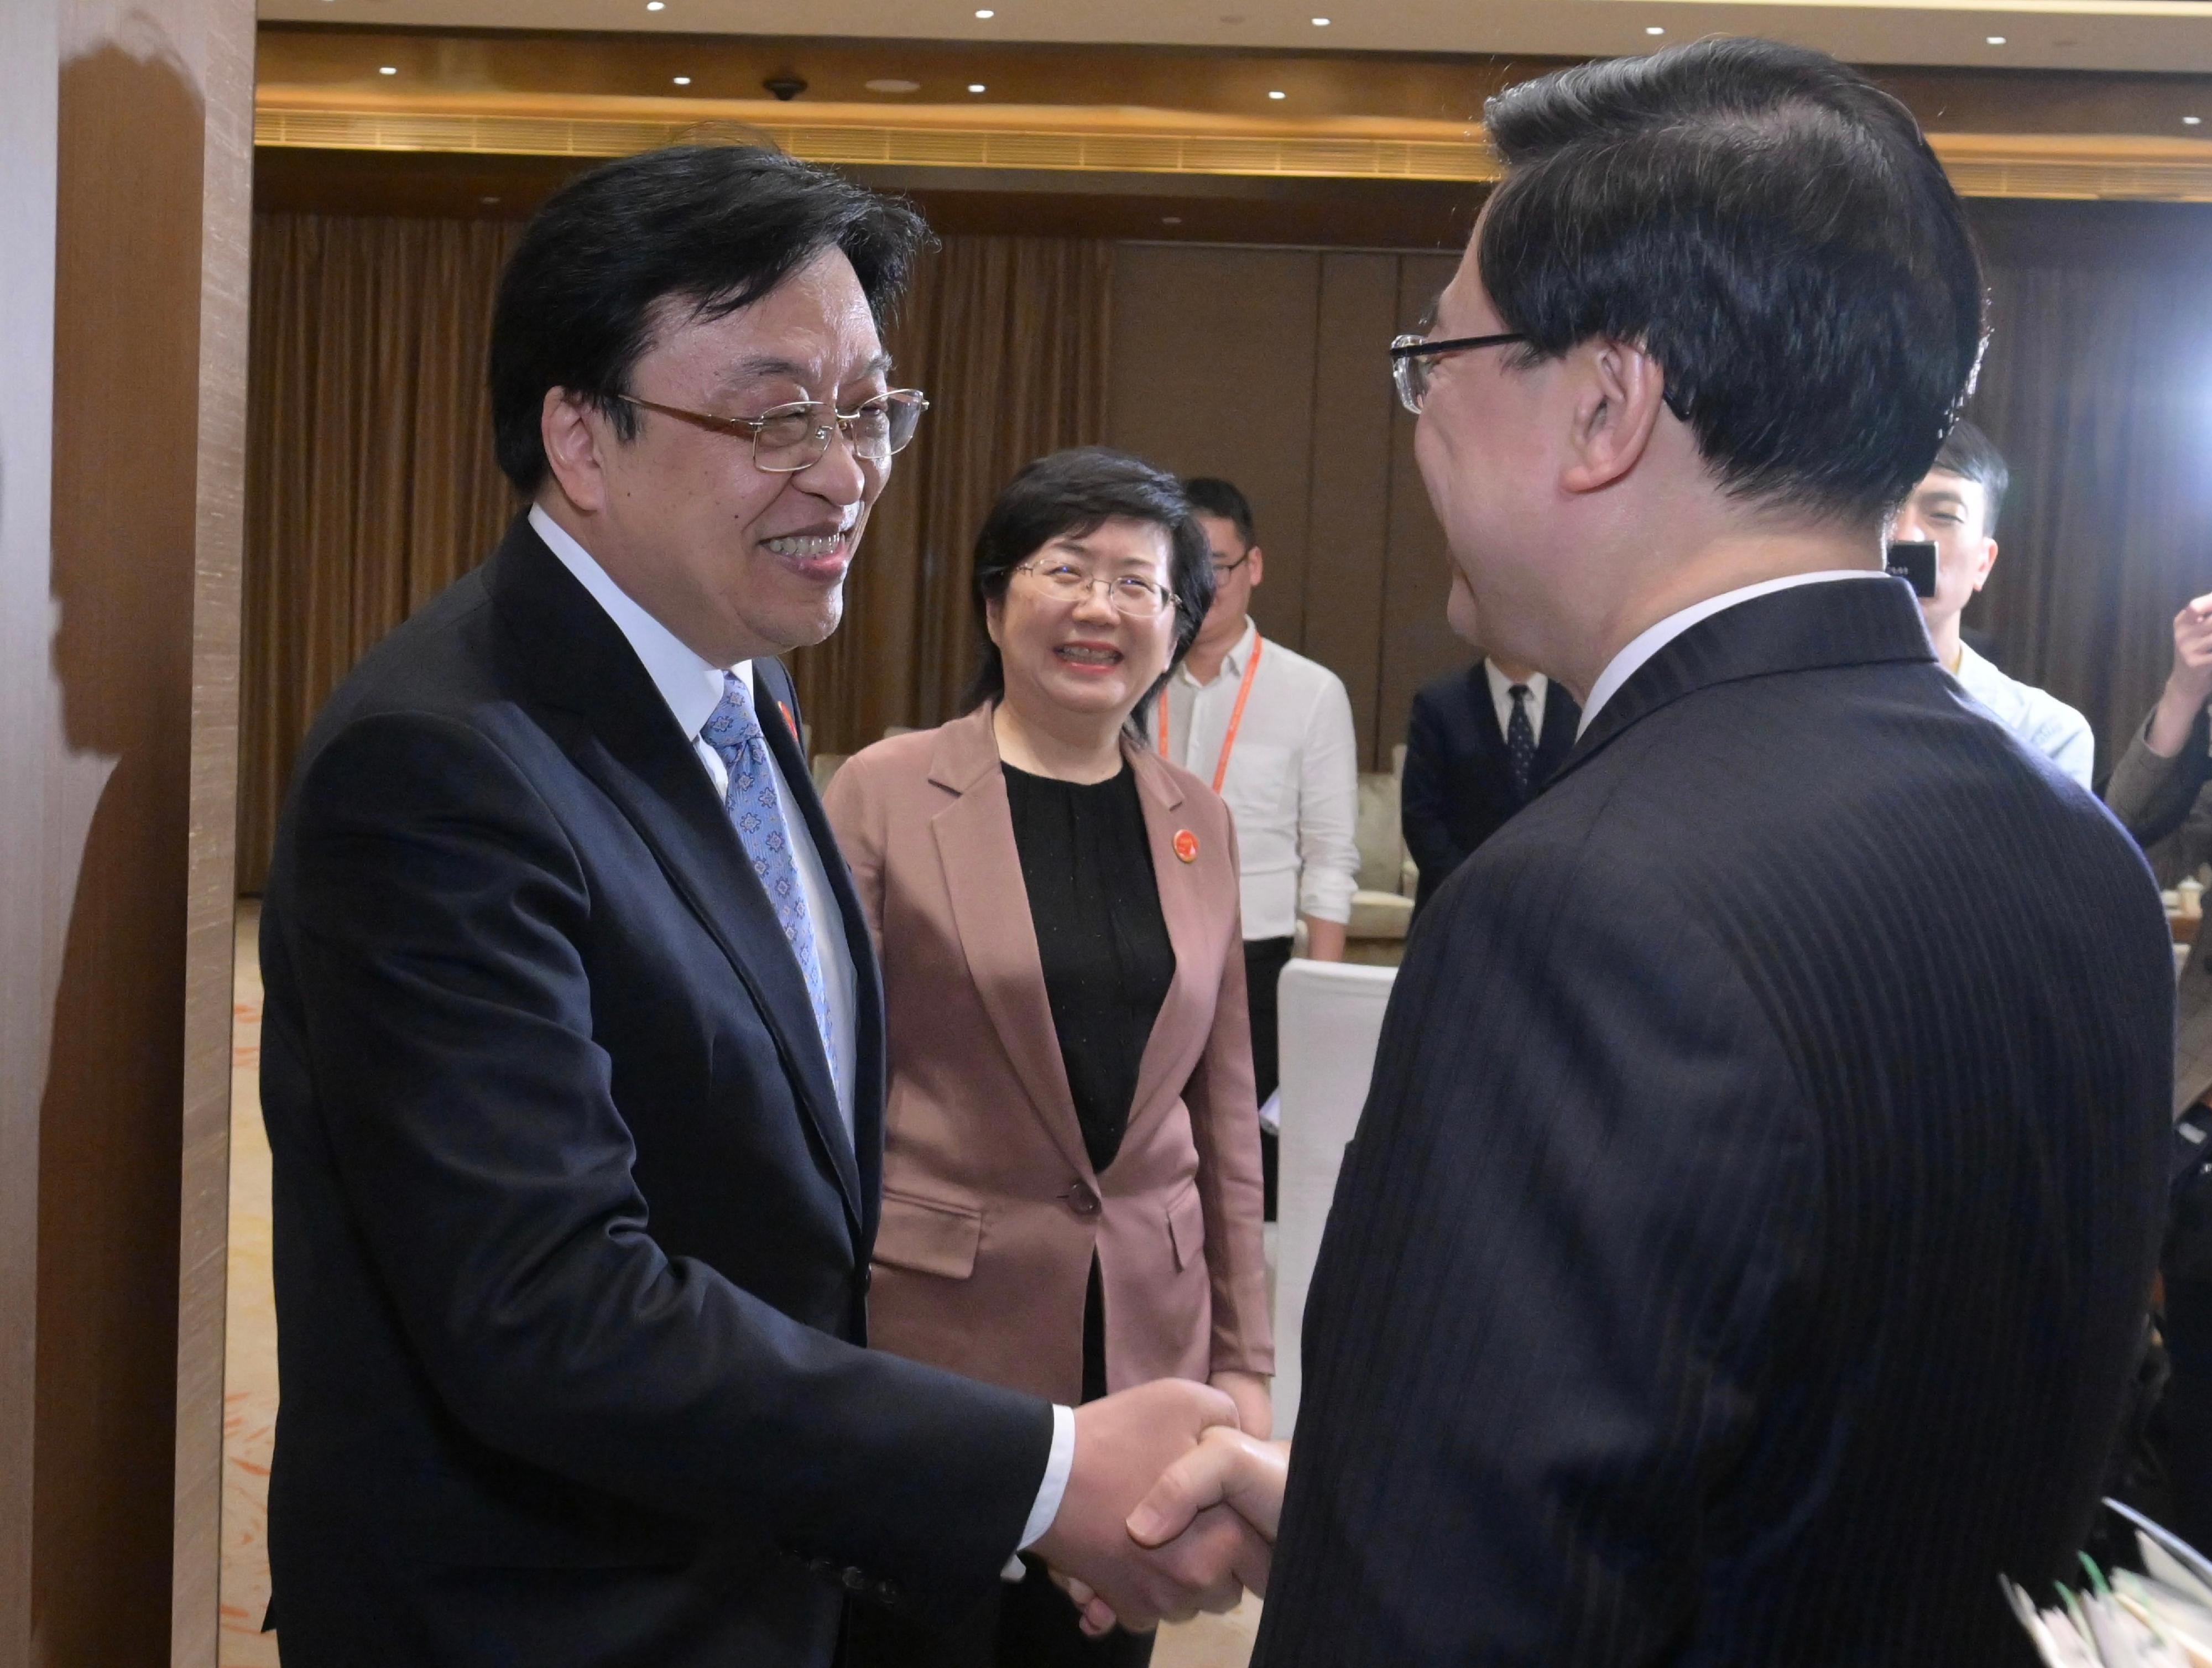 The Chief Executive, Mr John Lee (right), meets with the Secretary of the CPC Hainan Provincial Committee and the Governor of Hainan Province, Mr Feng Fei (left), and the Standing Committee Member of the CPC Hainan Provincial Committee and Head of the United Front Work Department of the Hainan Committee of the CPC, Ms Miao Yanhong (centre), during the Boao Forum for Asia Annual Conference 2023 in Hainan today (March 29). Photo shows Mr Lee shaking hands with Mr Feng.